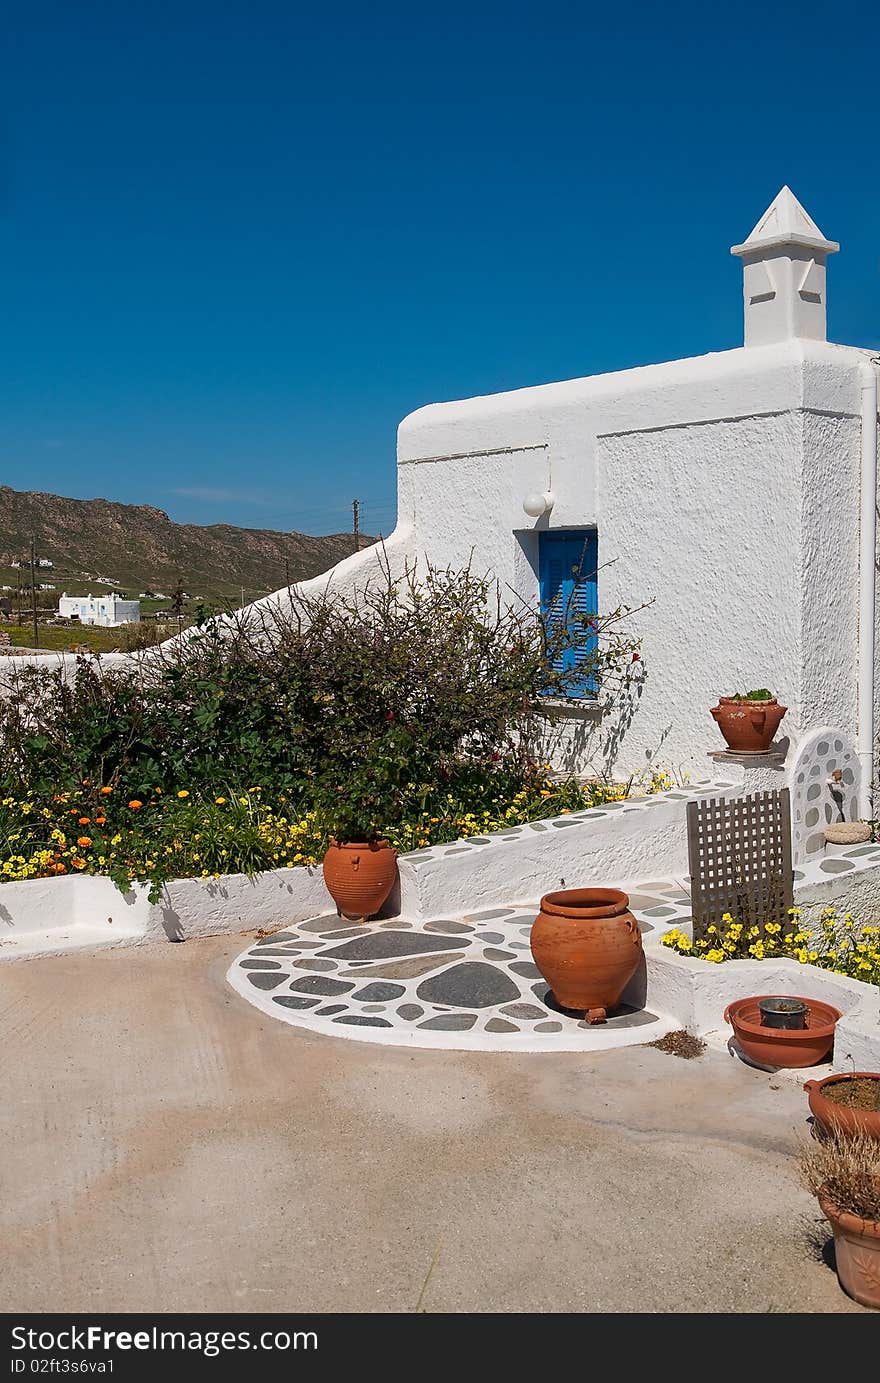 Courtyard Village house with flowers and pots, traditional for Greece. Courtyard Village house with flowers and pots, traditional for Greece.